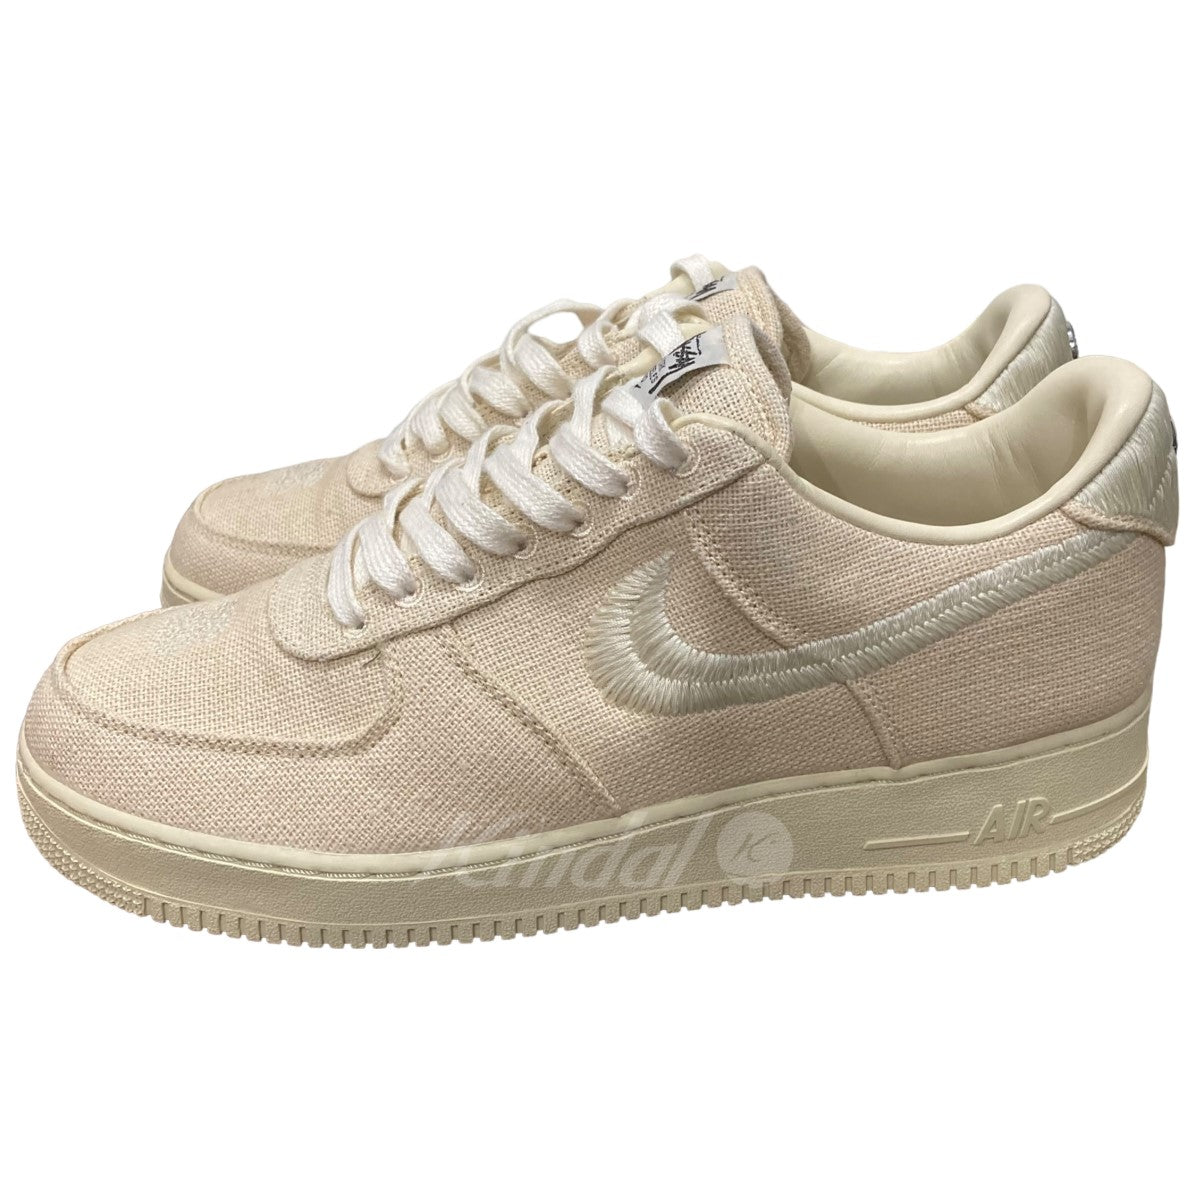 NIKE×Stussy(ナイキ×ステューシー) 「Air Force 1 Low Fossil Stone」エアフォーススニーカー